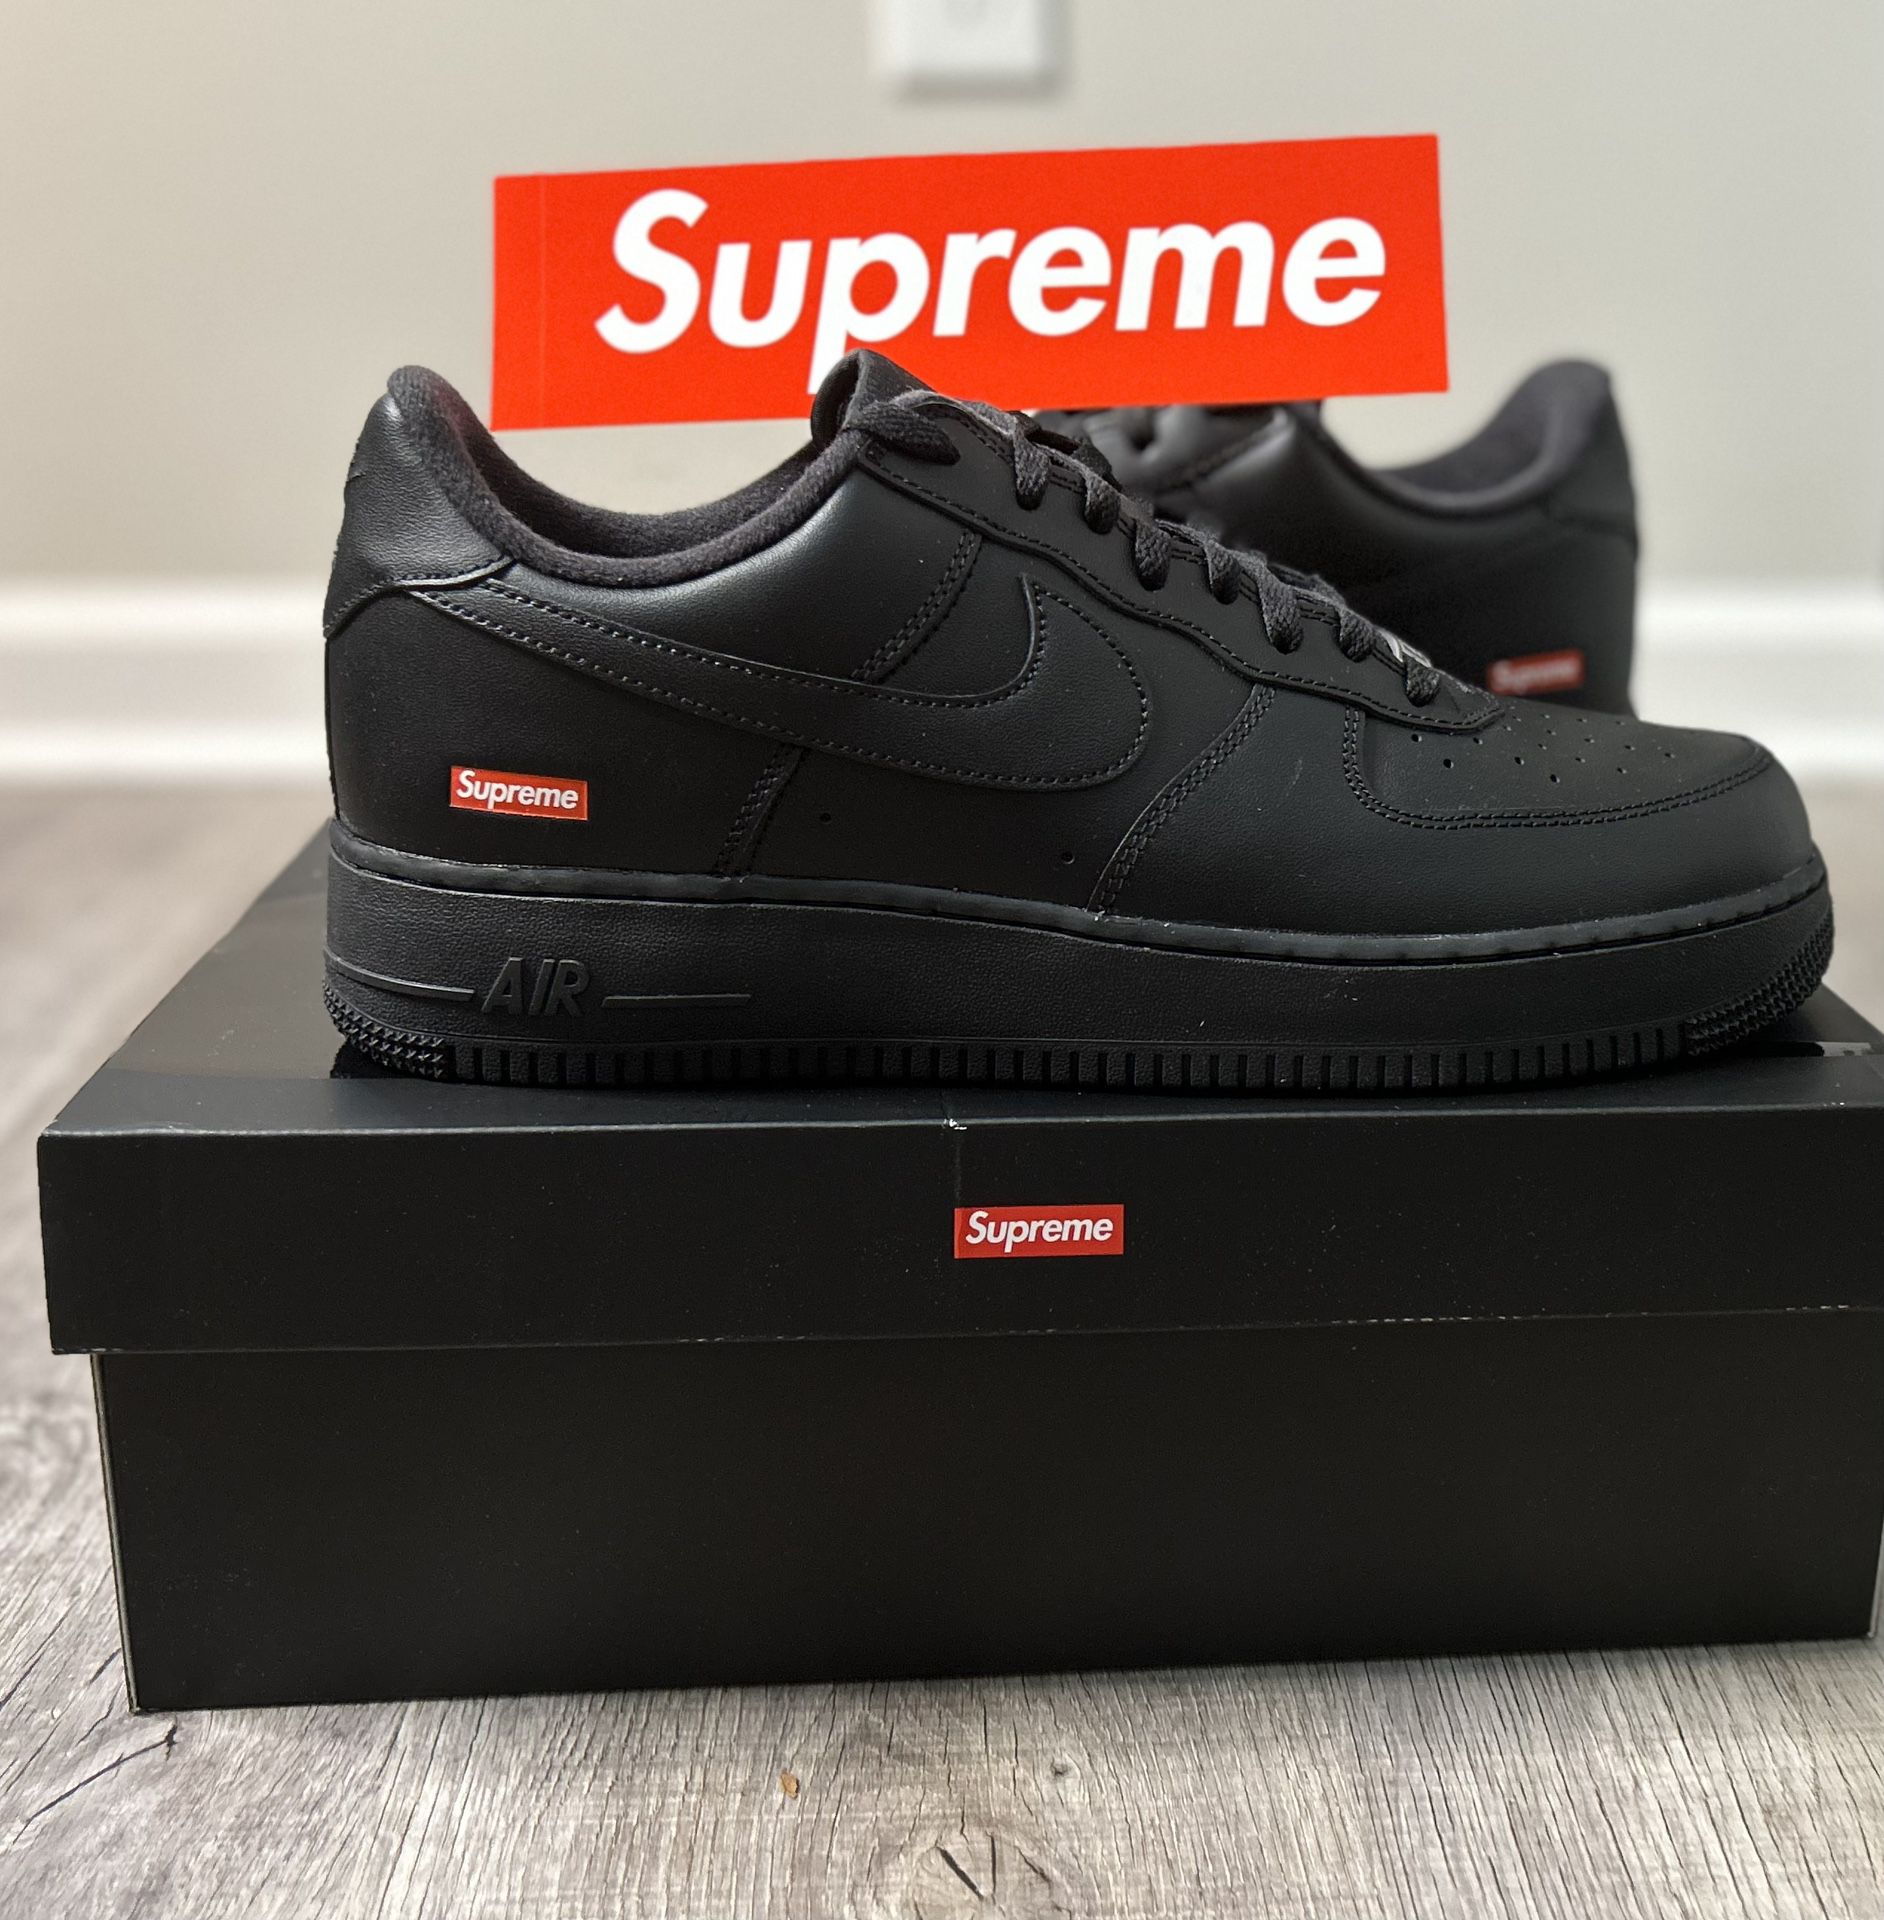 Nike Air Force 1 Low Supreme Black size 12 for Sale in Charlotte